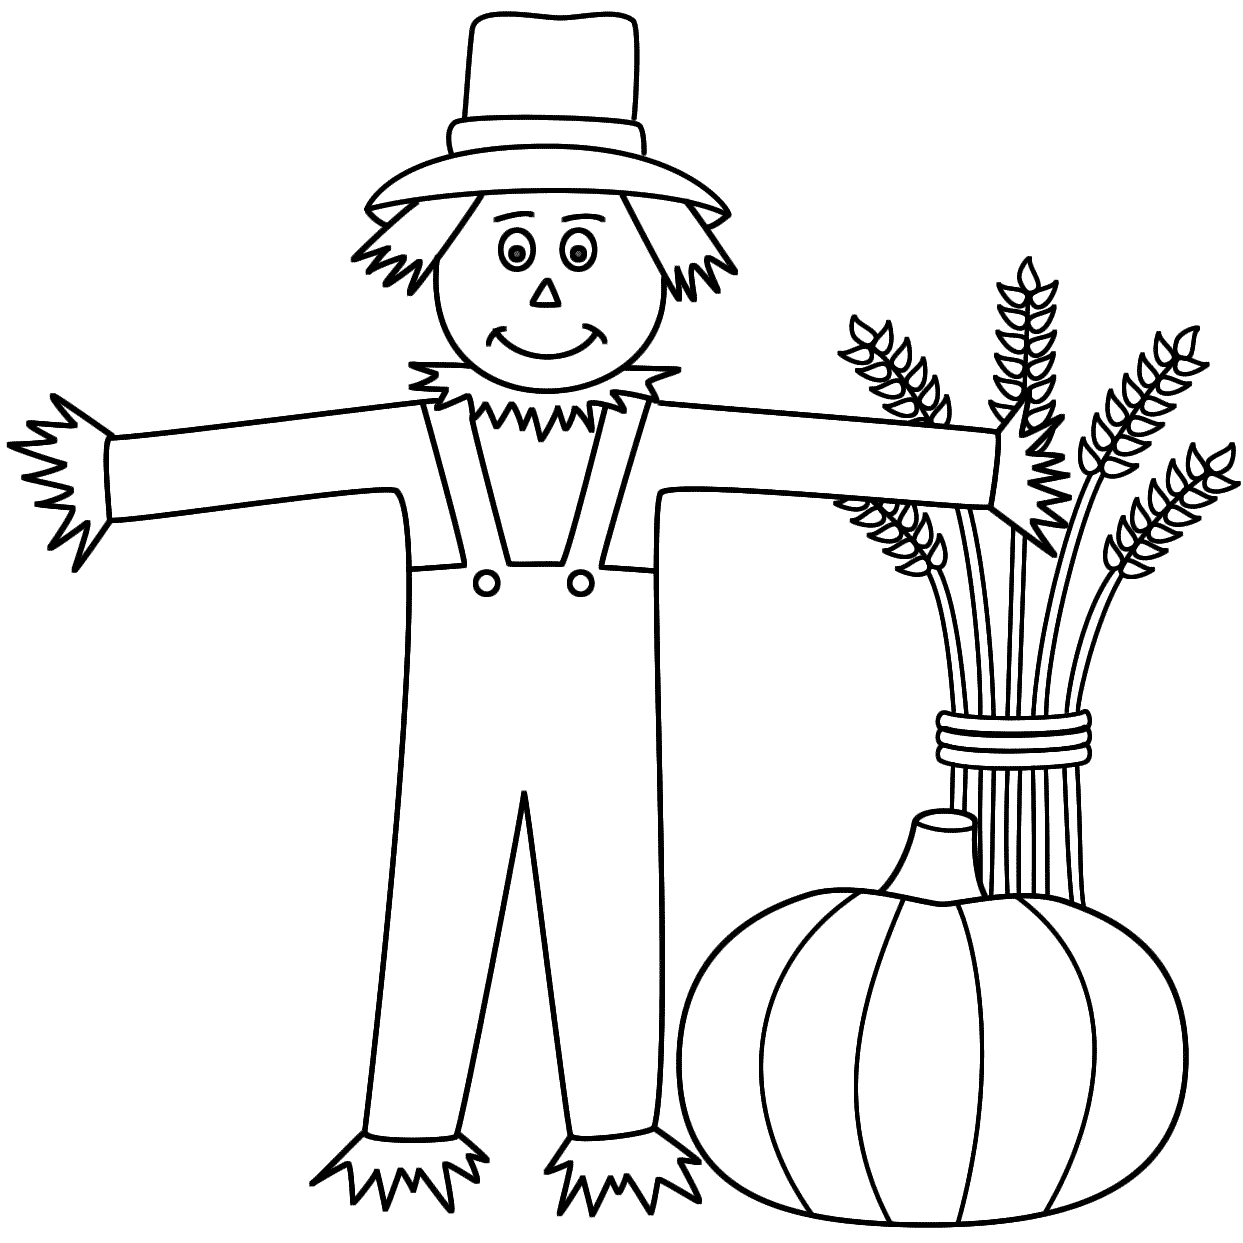 Pumpkin And Scarecrow Image For Kids